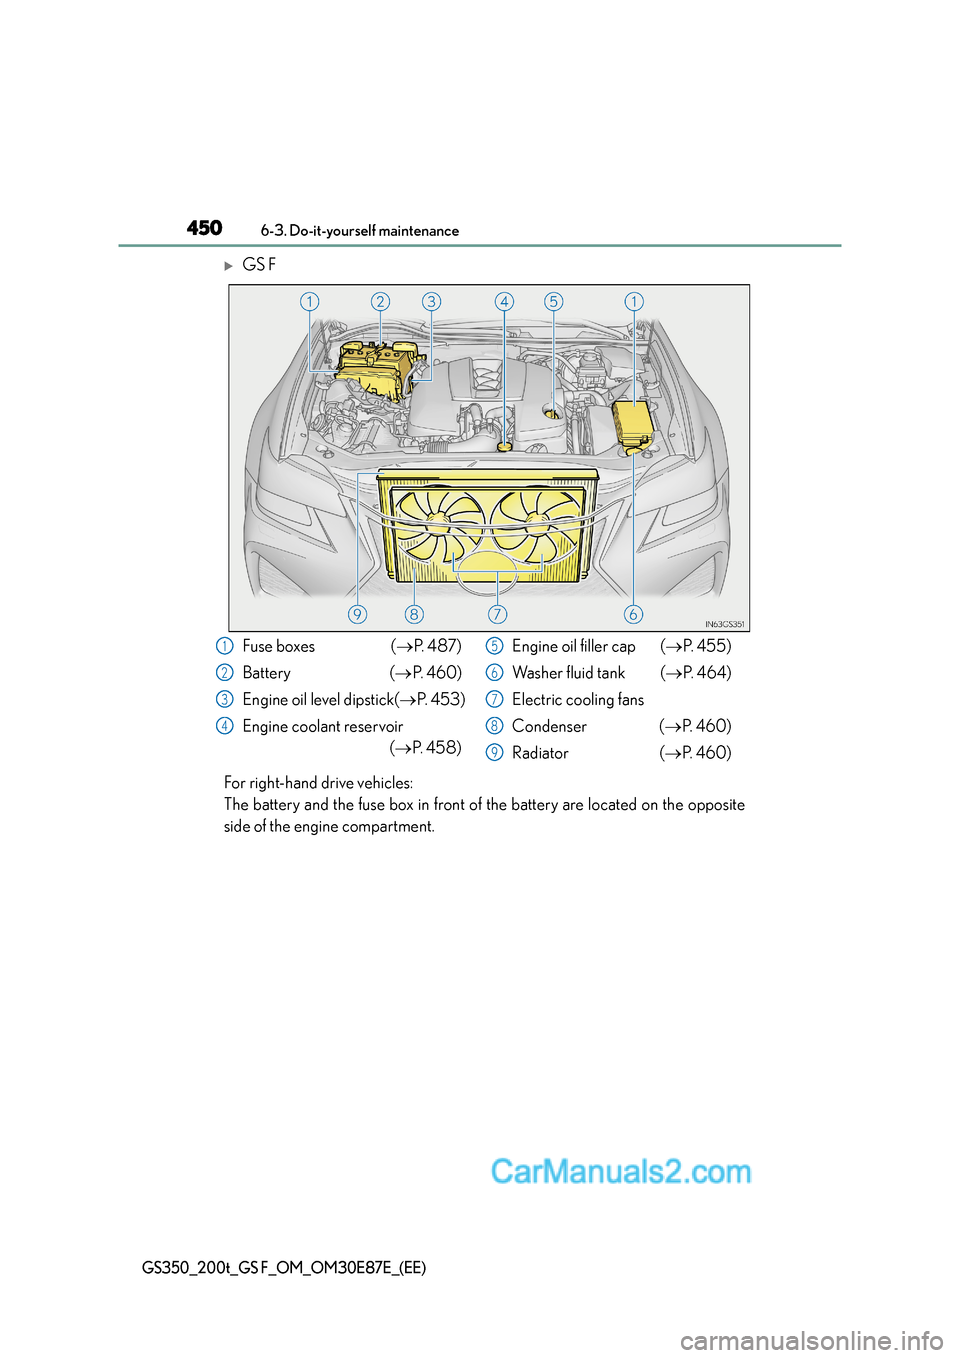 Lexus GS200t 2016  Owners Manuals 4506-3. Do-it-yourself maintenance
GS350_200t_GS F_OM_OM30E87E_(EE)
�XGS F
For right-hand drive vehicles: 
The battery and the fuse box in front of the battery are located on the opposite
side of the 